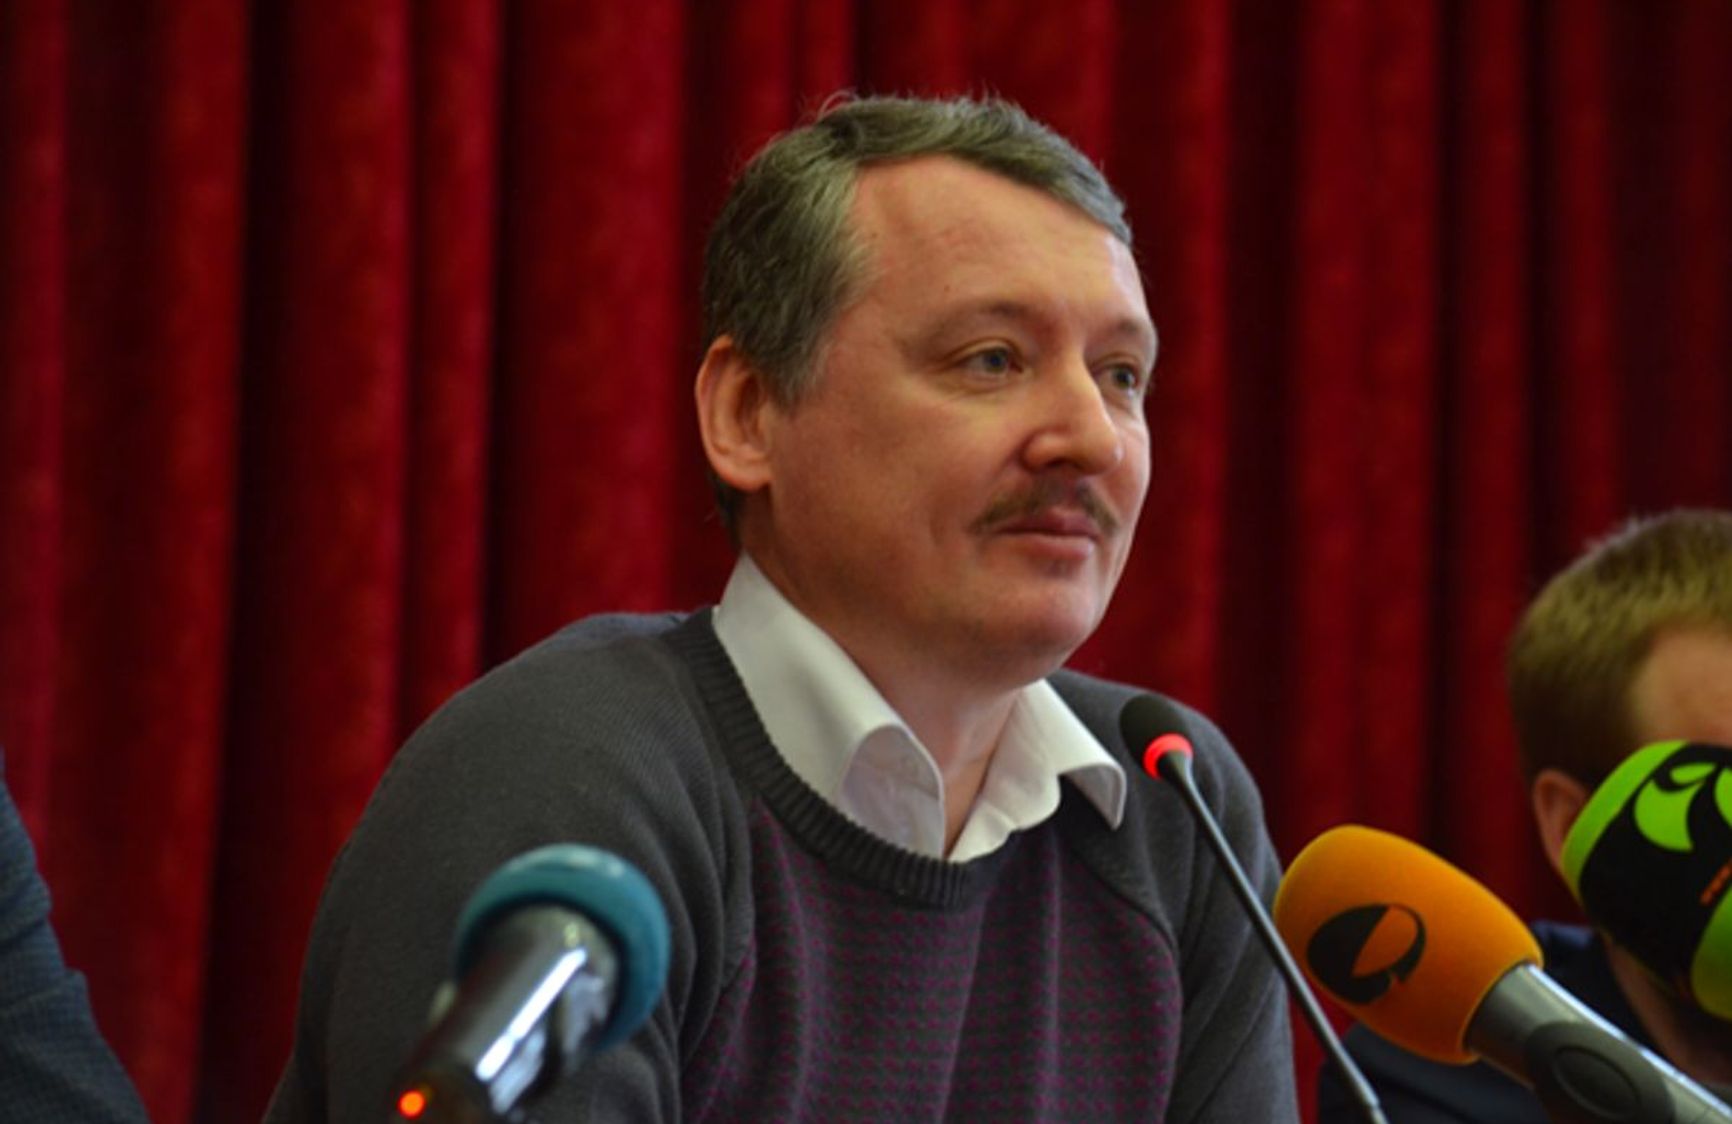 Girkin at a press conference in Yekaterinburg on March 14, 2015